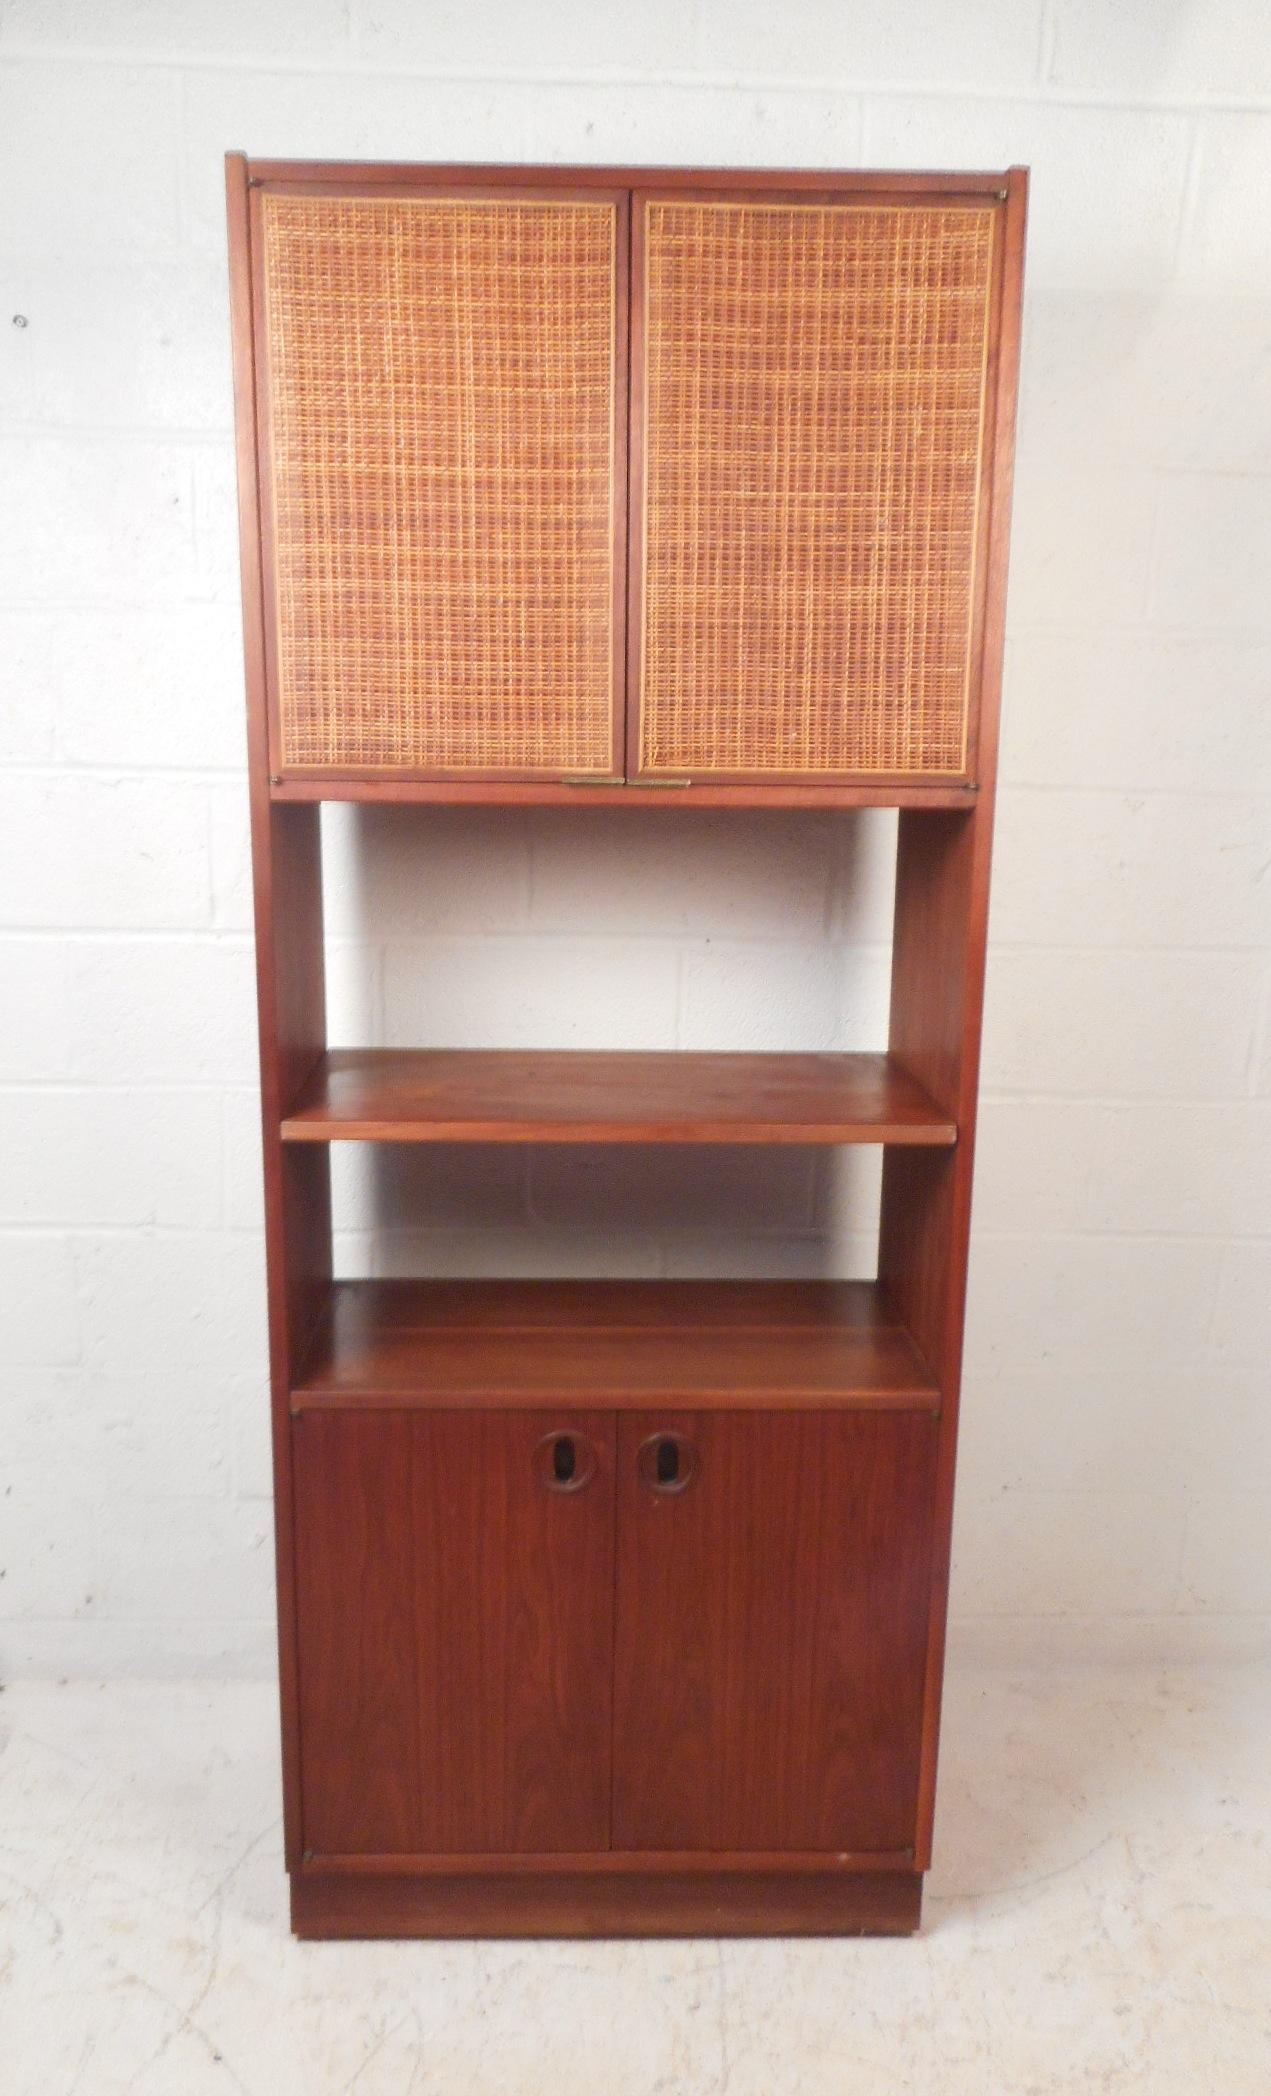 Pair of Mid-Century Modern Bookcases or Shelves 1